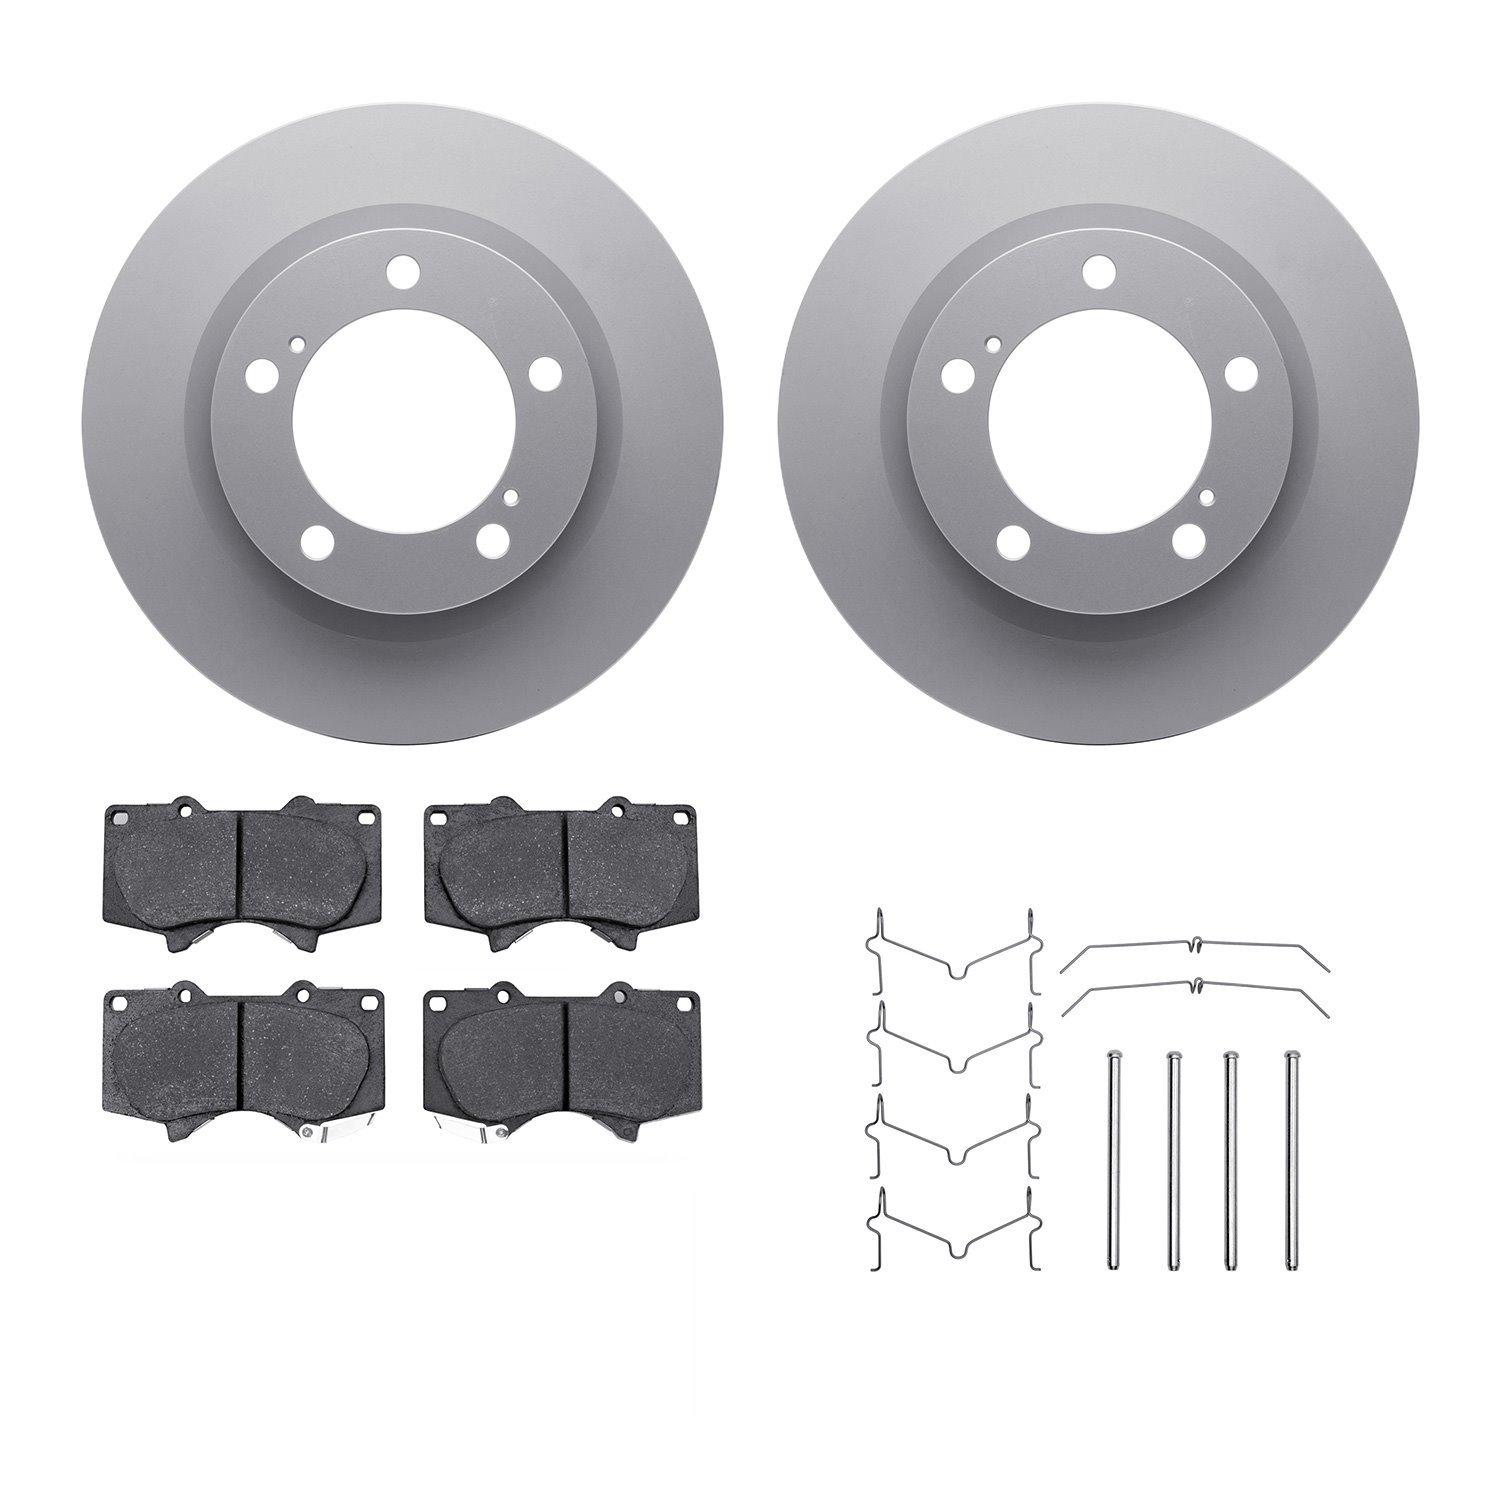 4312-76058 Geospec Brake Rotors with 3000-Series Ceramic Brake Pads & Hardware, Fits Select Lexus/Toyota/Scion, Position: Front